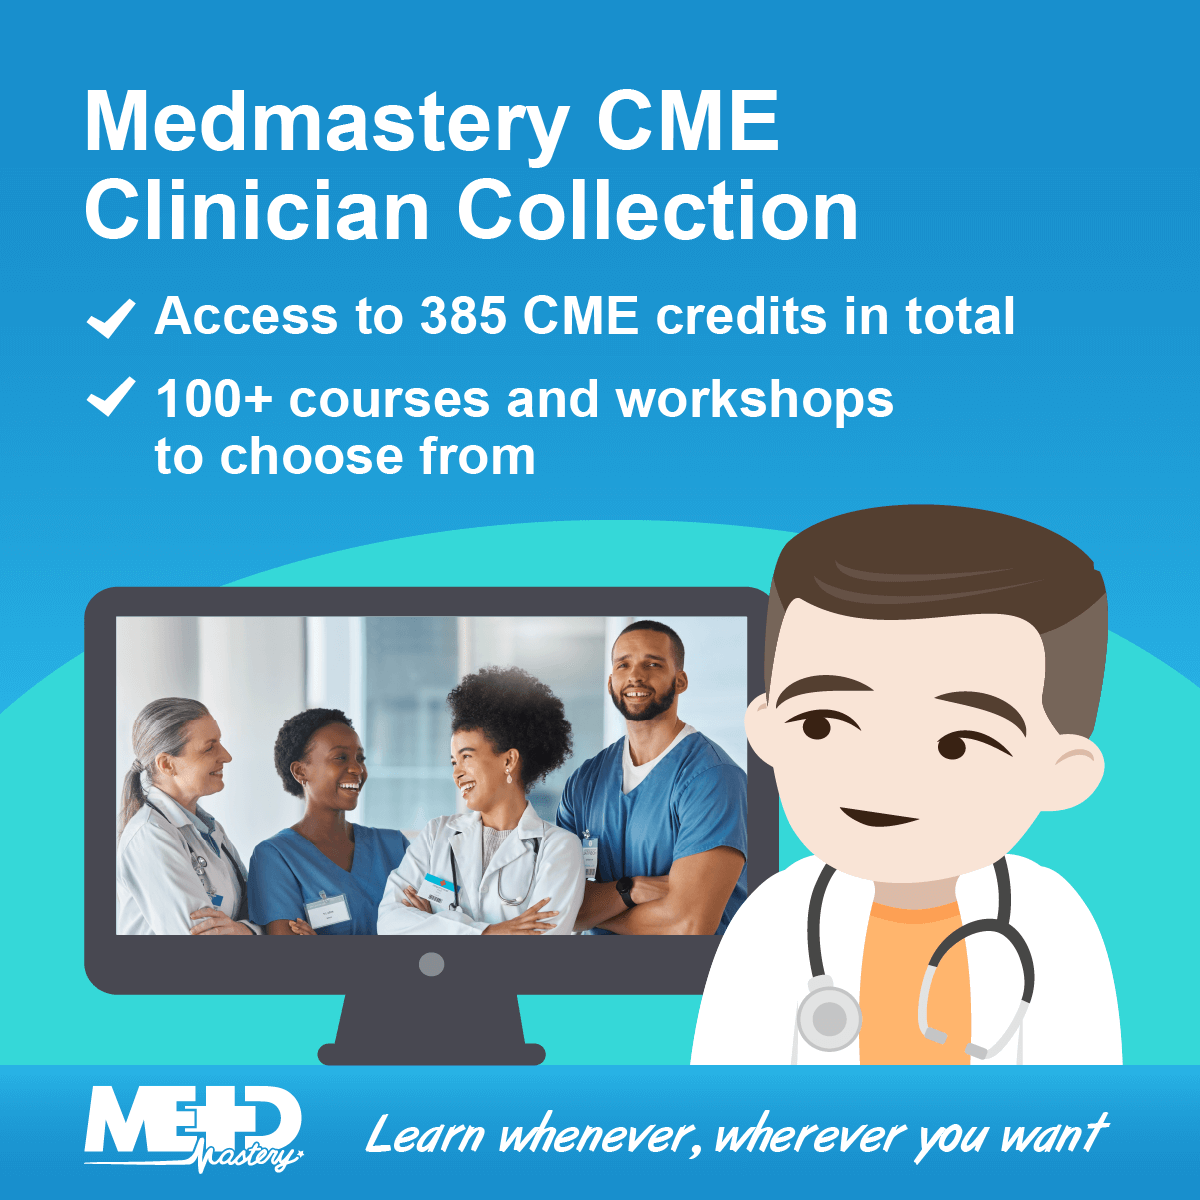 Medmastery CME Clinician Collection